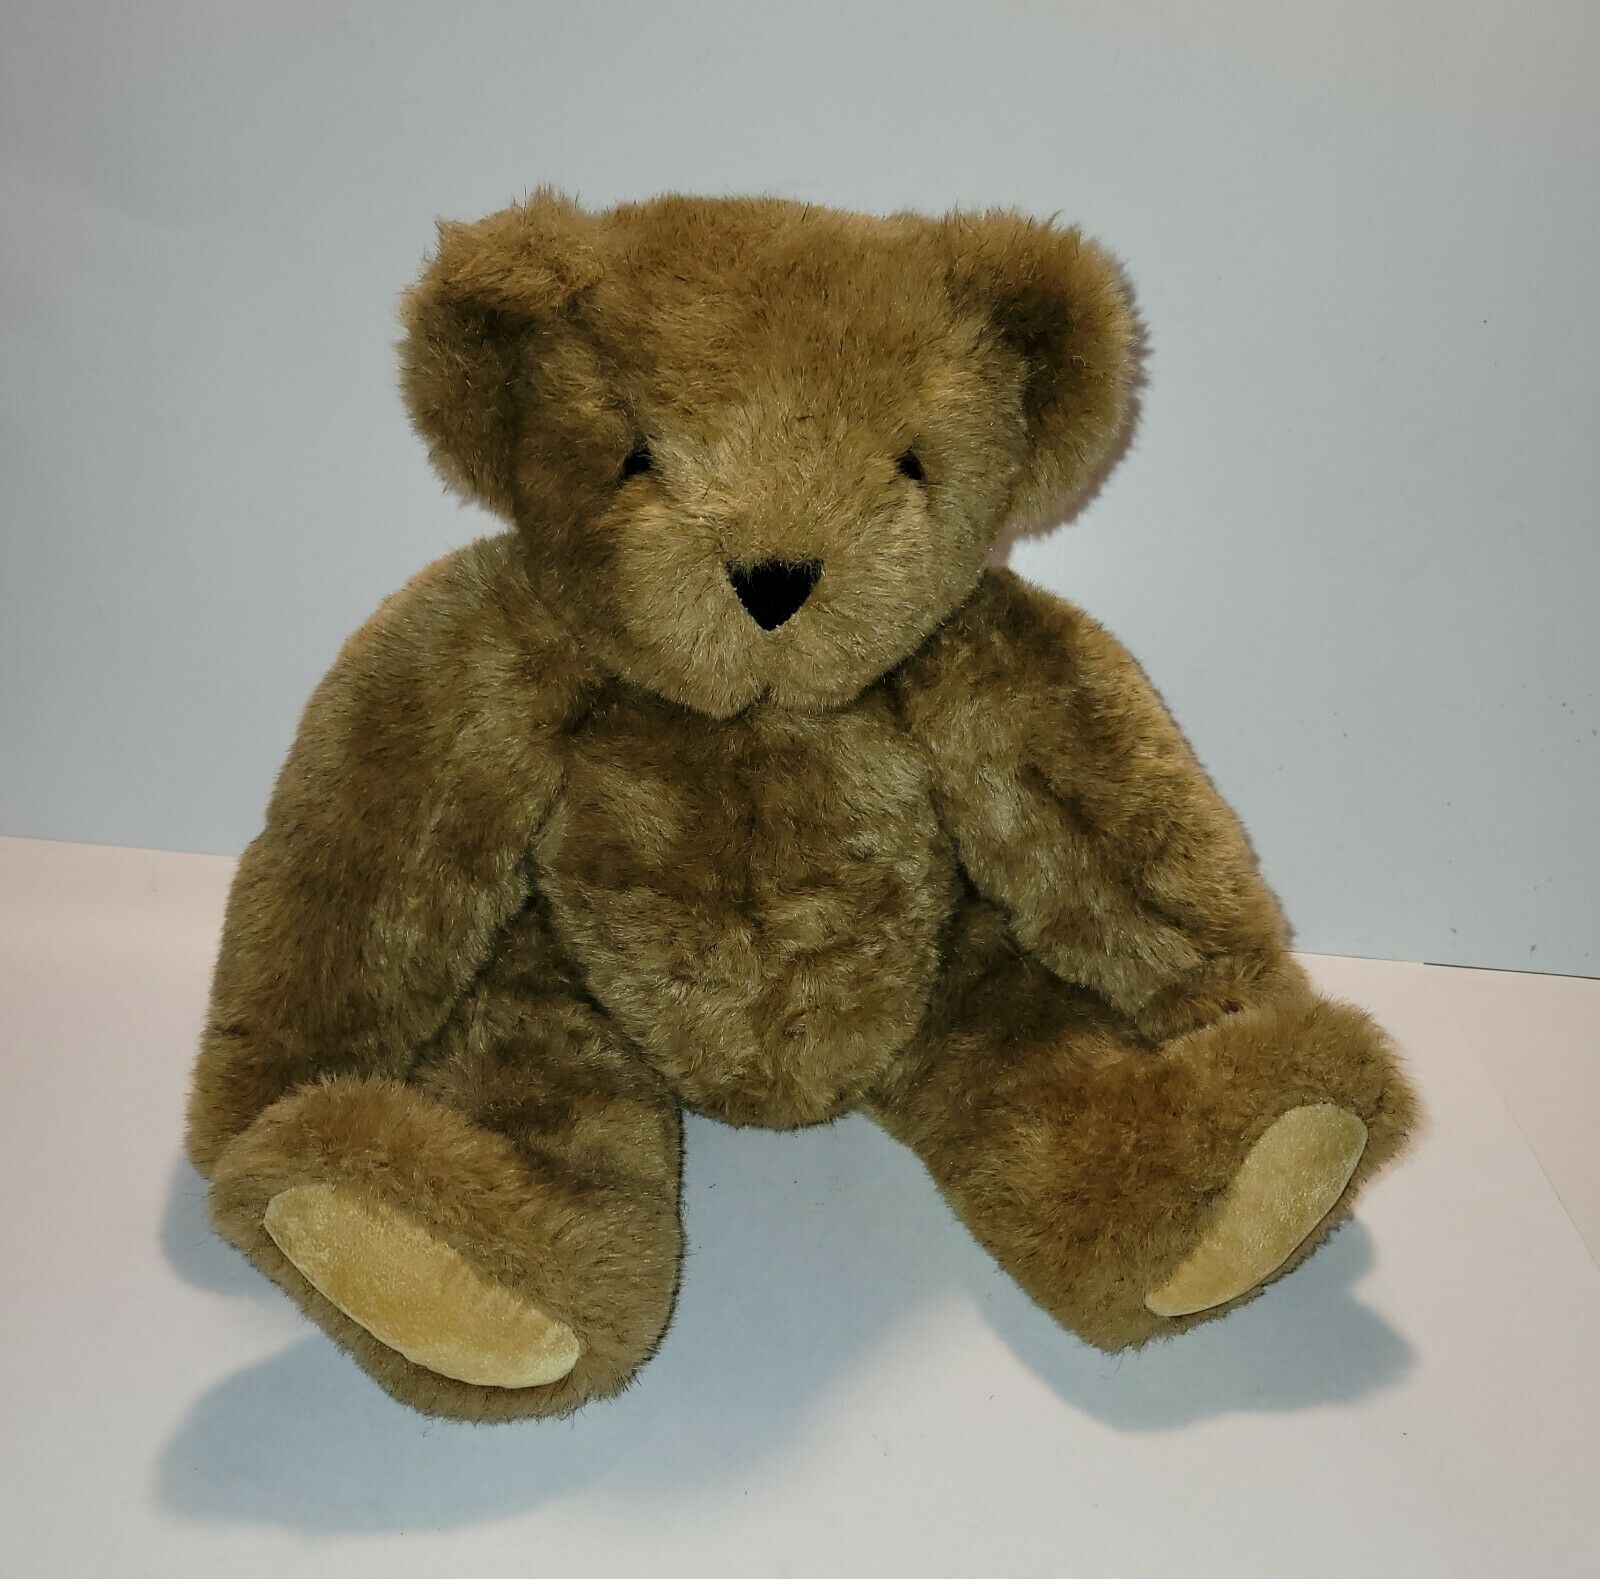 Authentic 16" Jointed Vermont Teddy Bear Plush